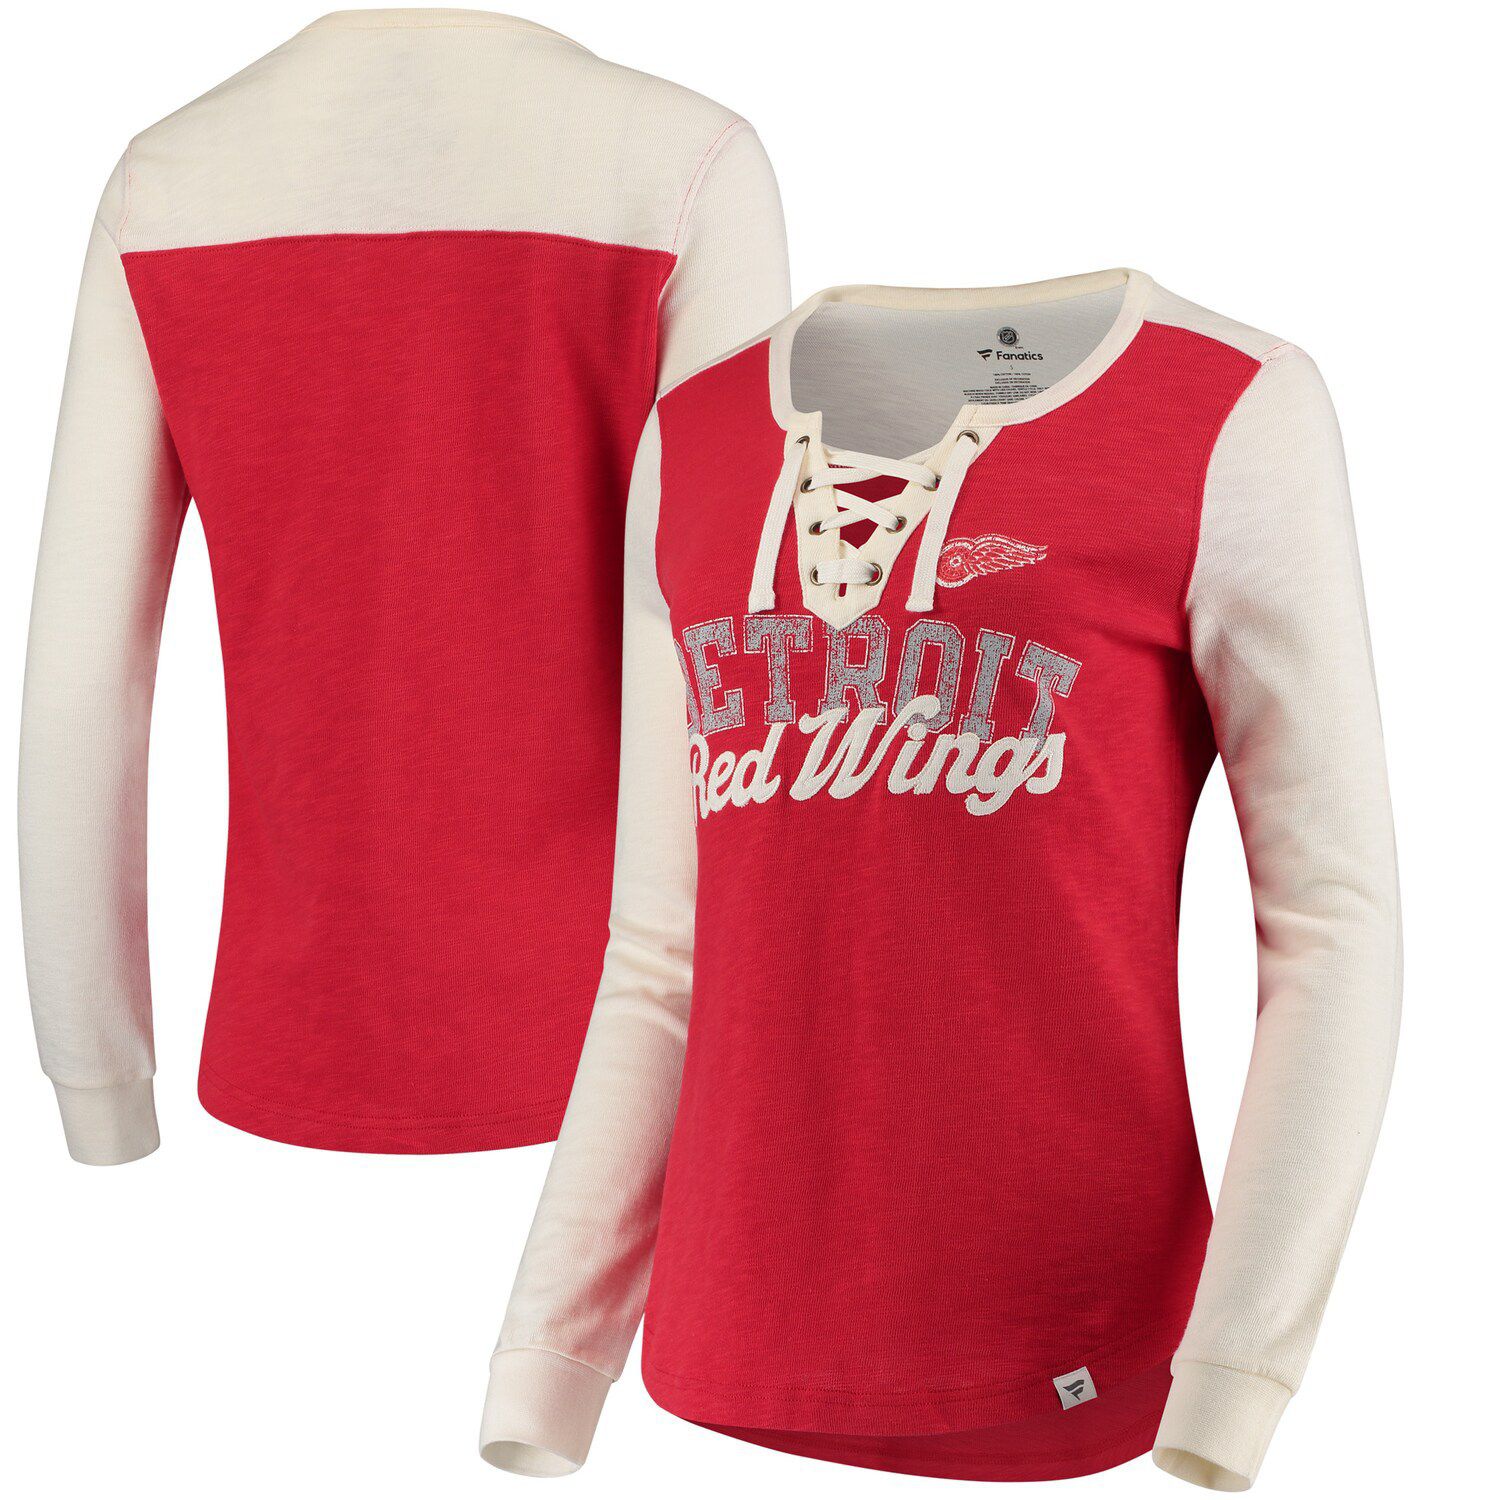 red wings t shirt jersey